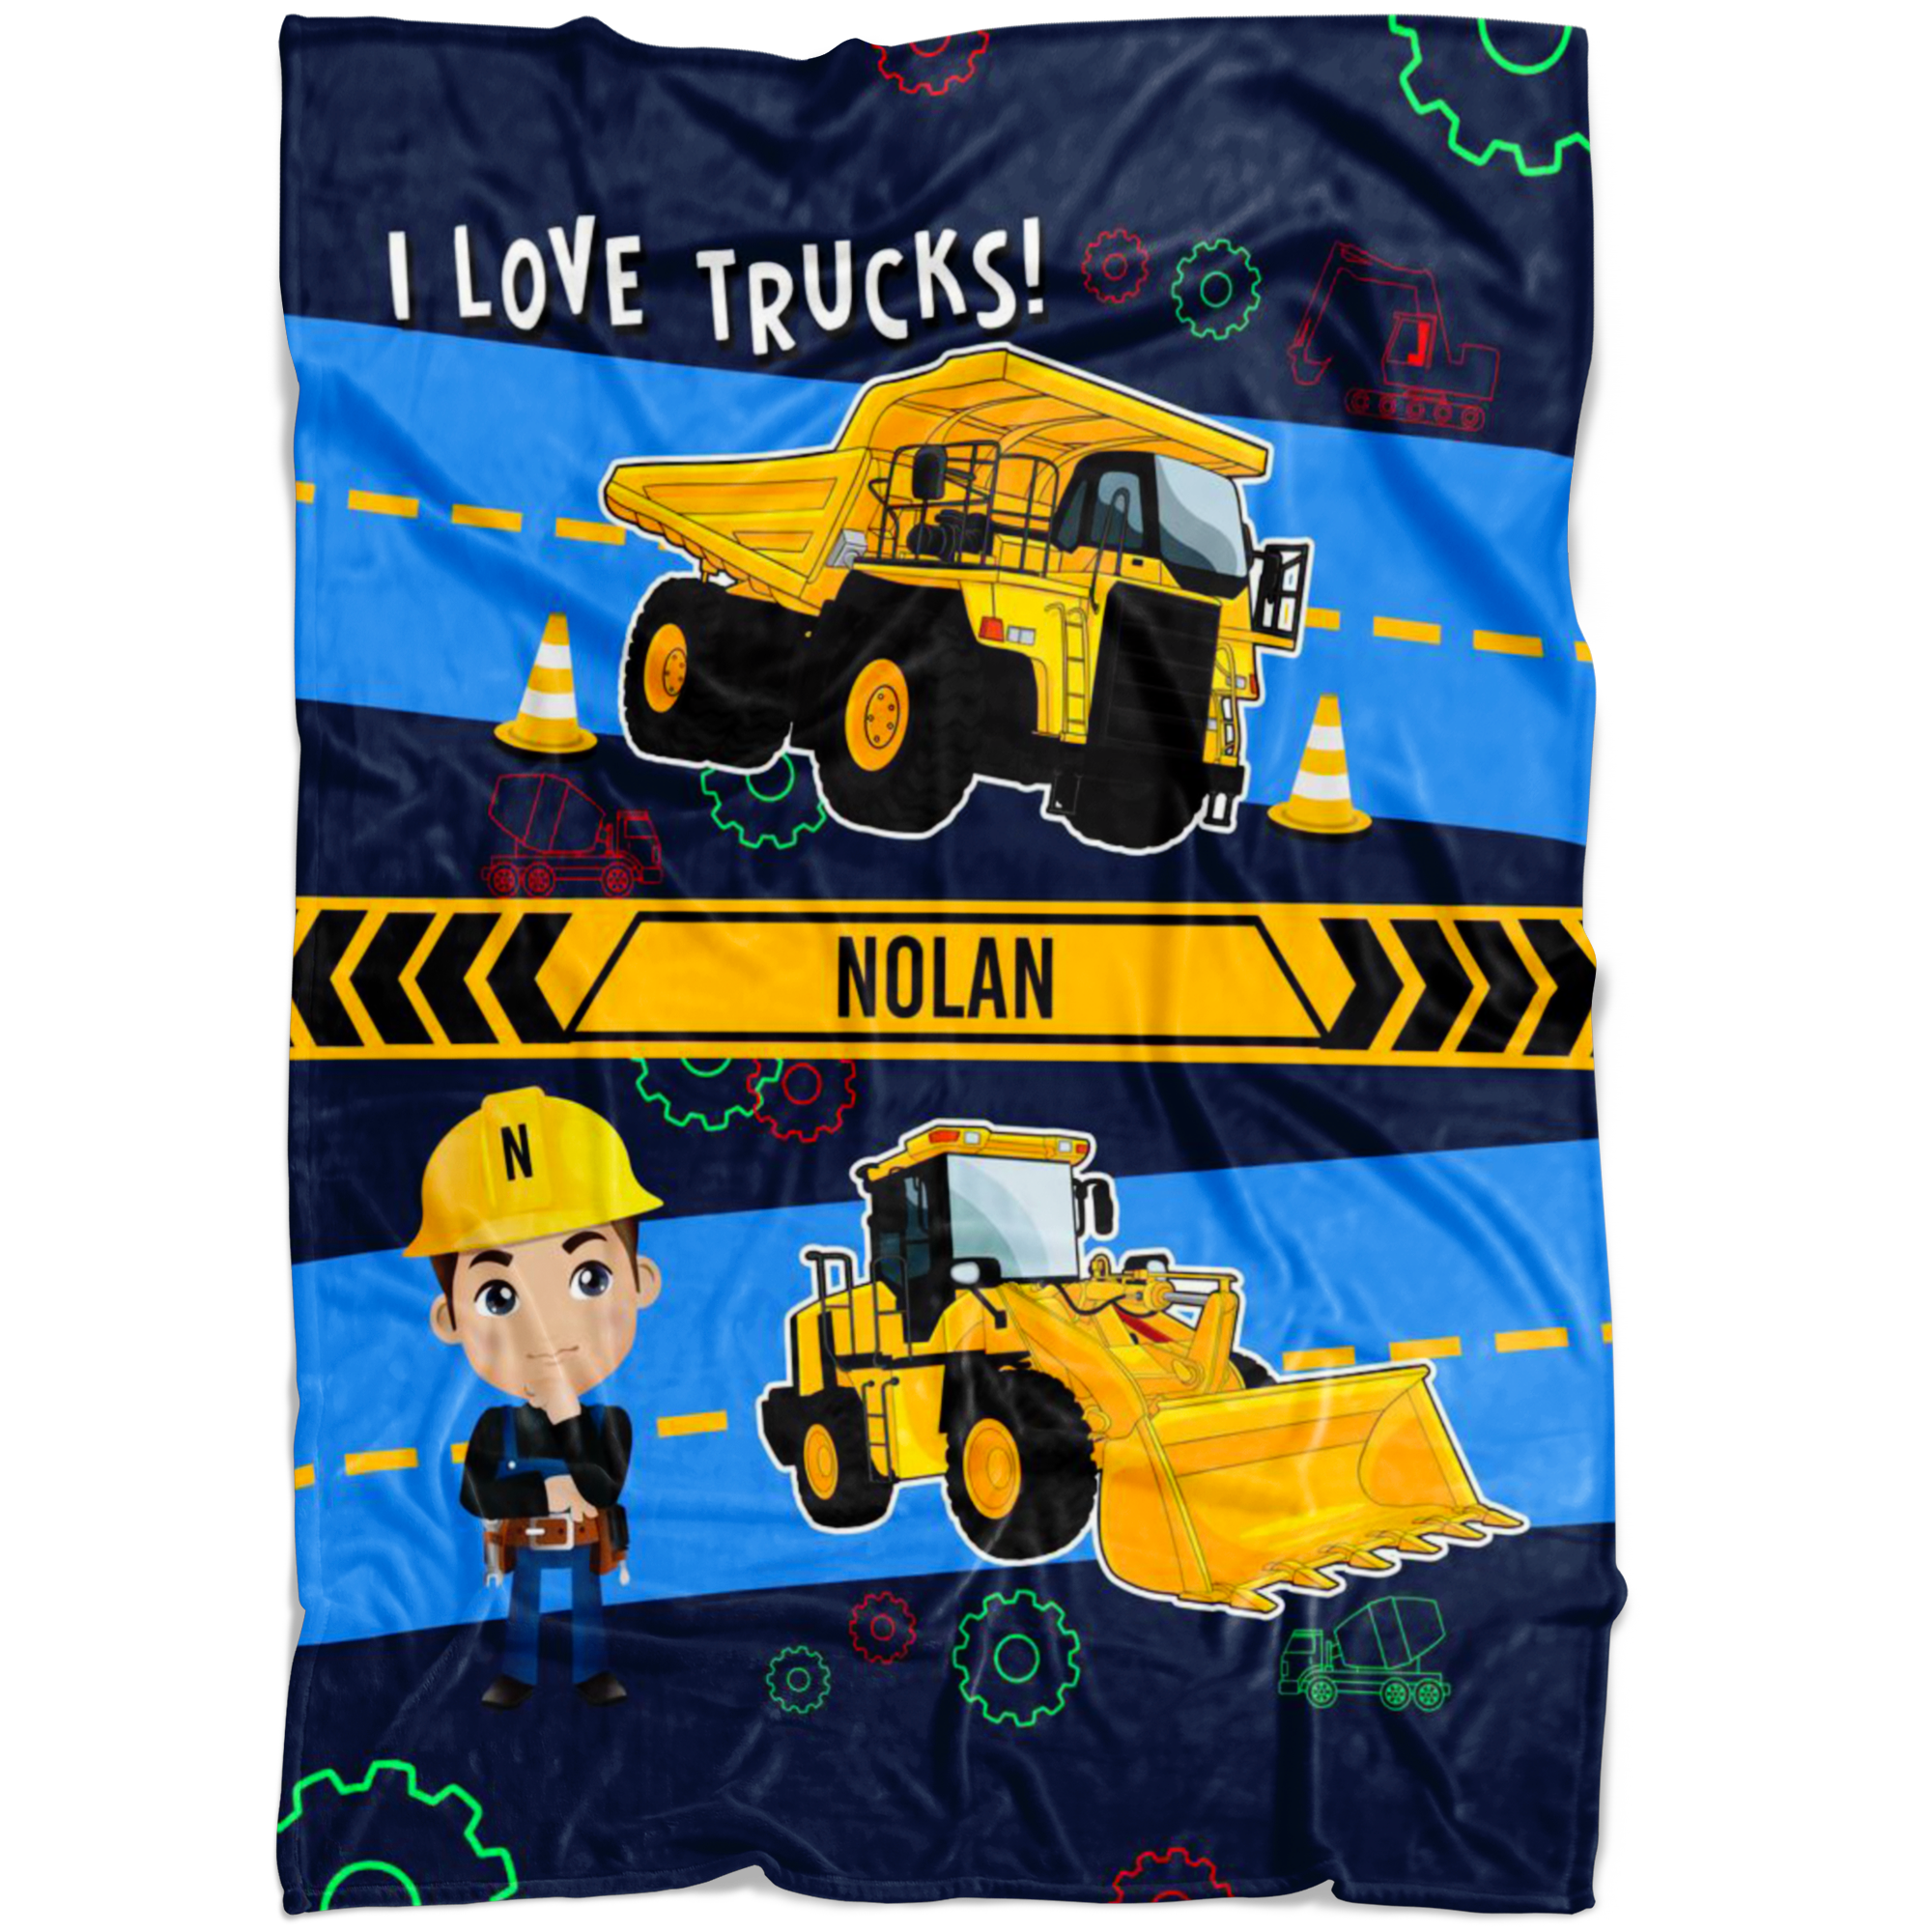 Personalized Name I Love Trucks Blanket for Boys & Girls with Character Personalization - NOLAN